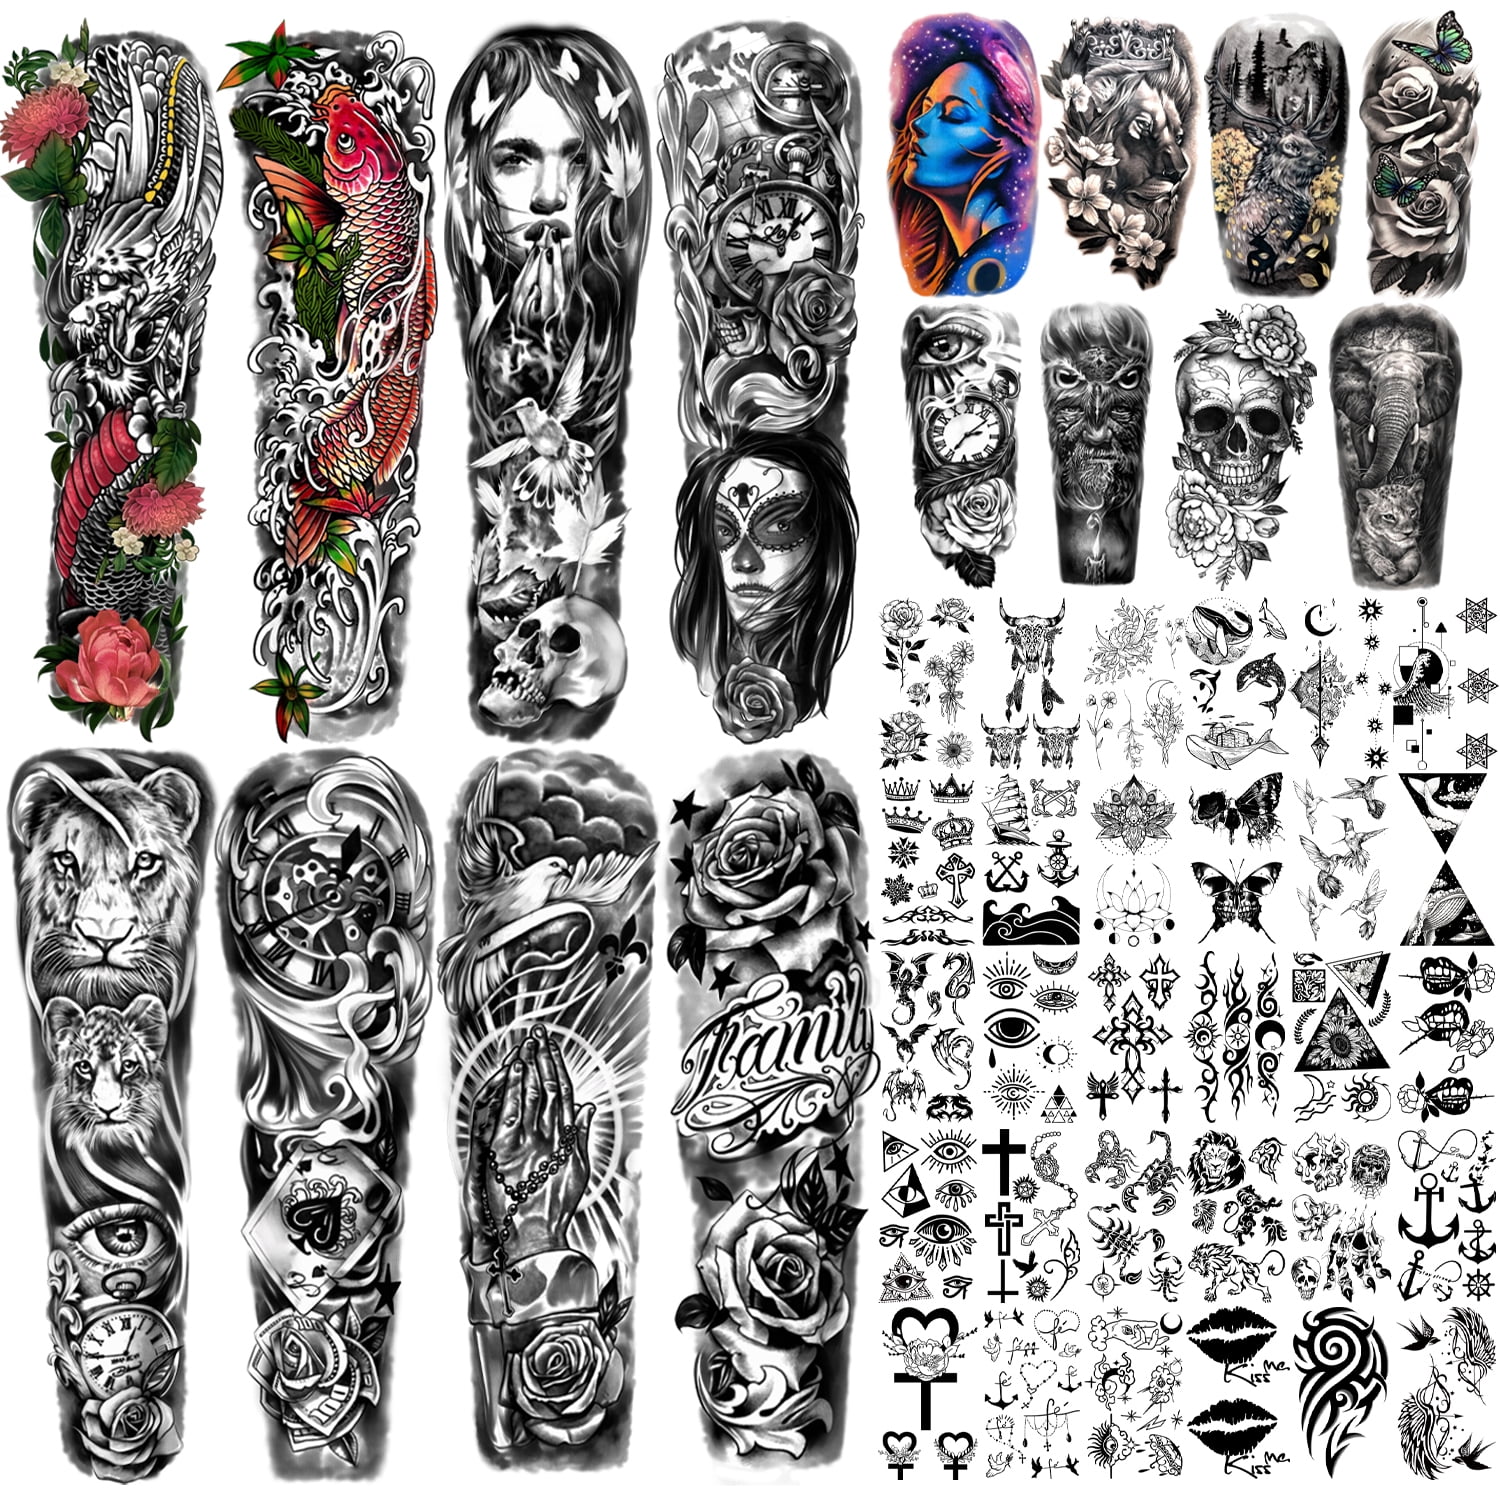  Panda Legends 3 Sheets Snake Scales Temporary Tattoos Body Art  Tattoo Stickers for Halloween Cosplay Costume Party,multicolor,one size :  Beauty & Personal Care